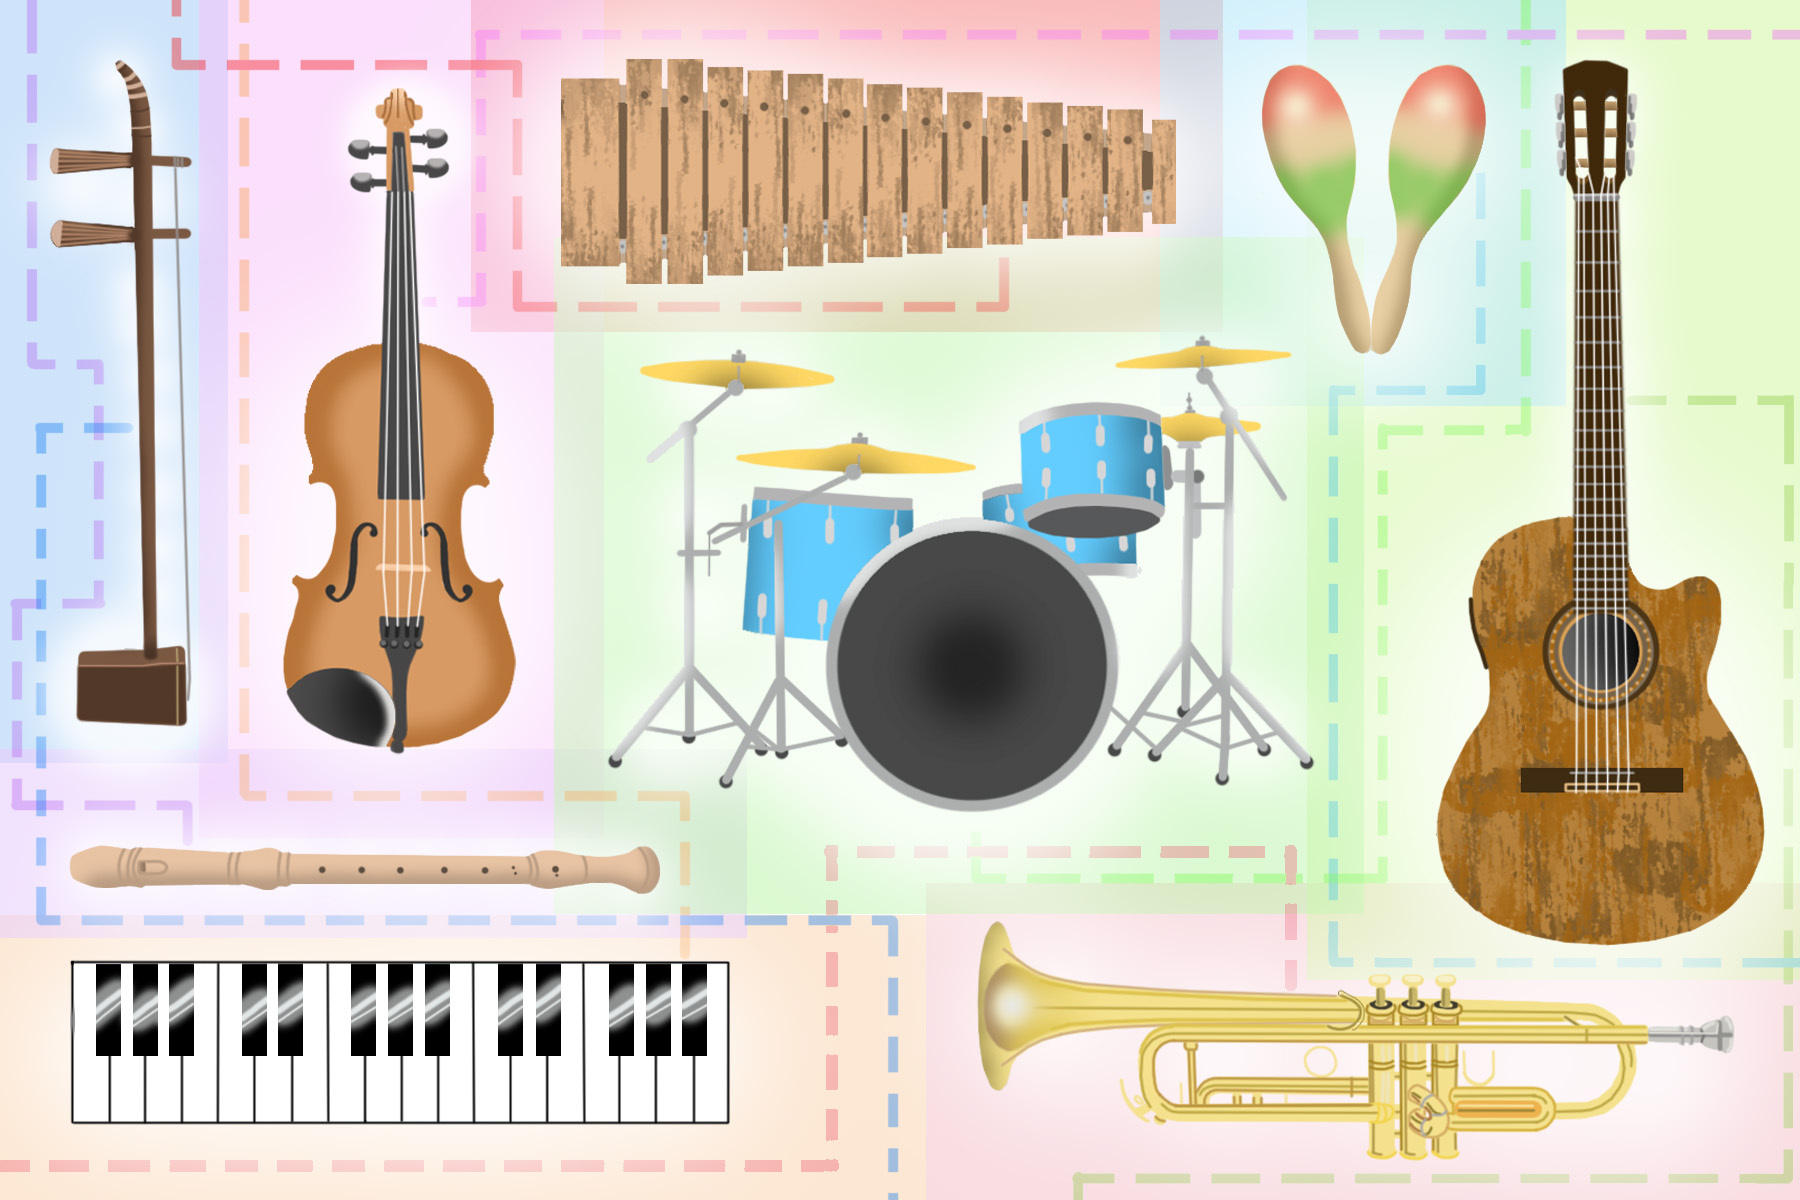 In an article about the benefits of learning a musical instrument, the image displays an array of instruments in bright colors.